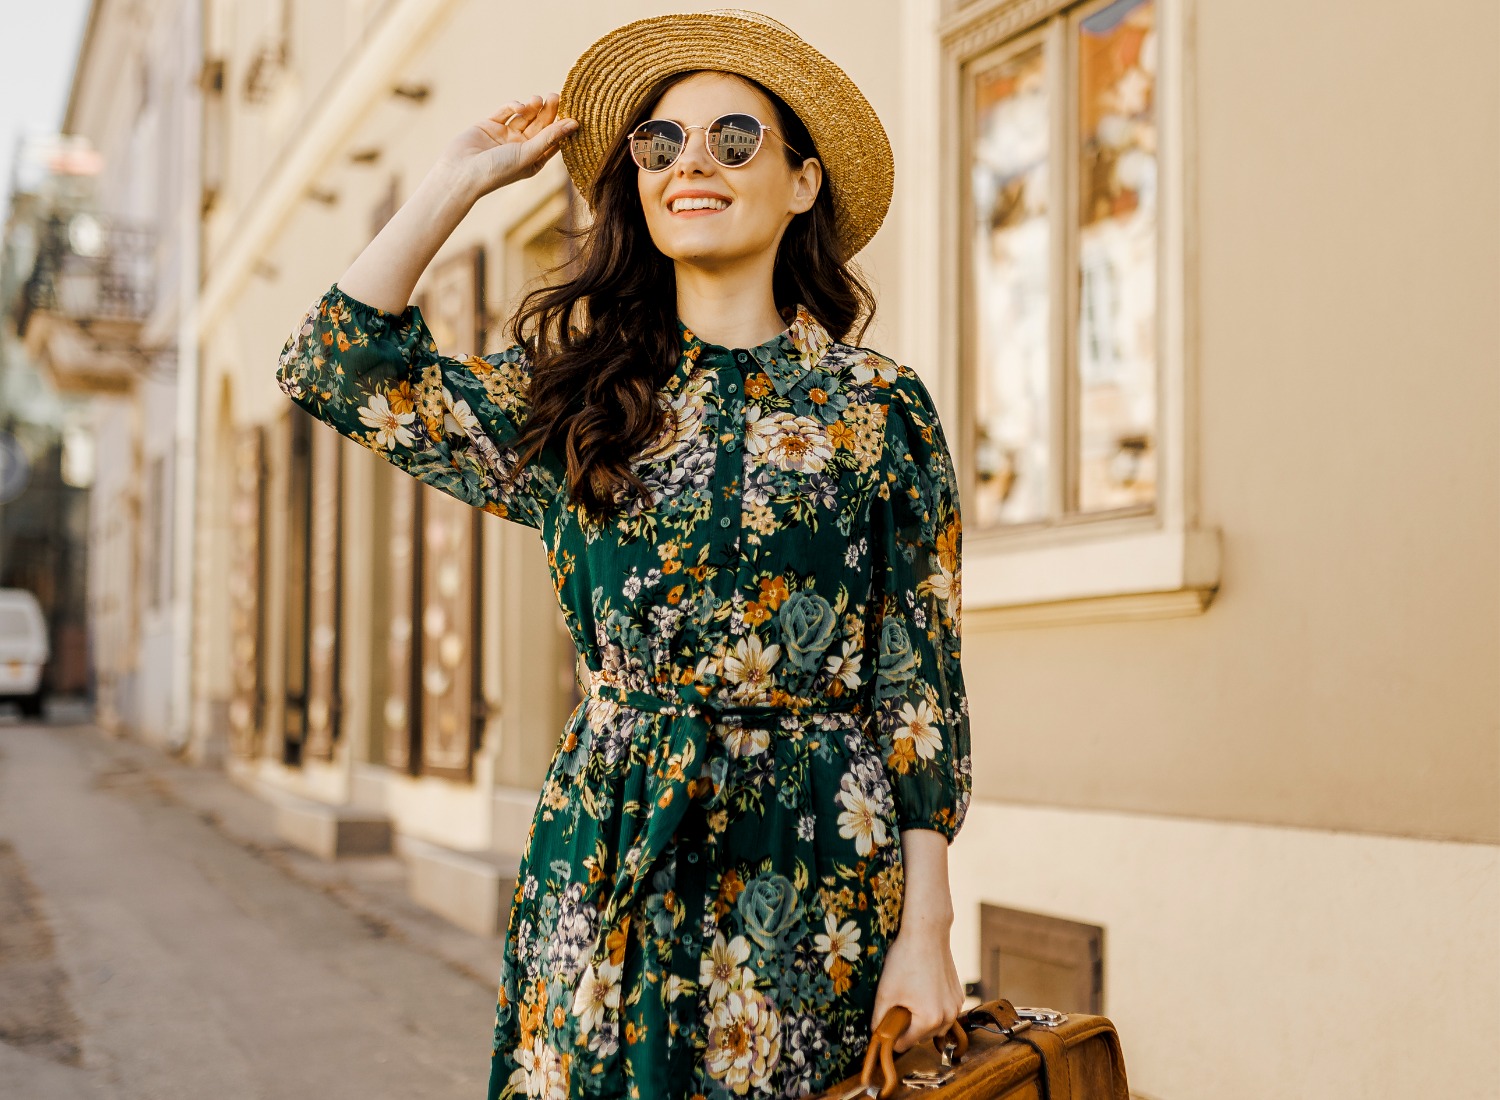 8 Best Travel Outfits for Women of All Sizes